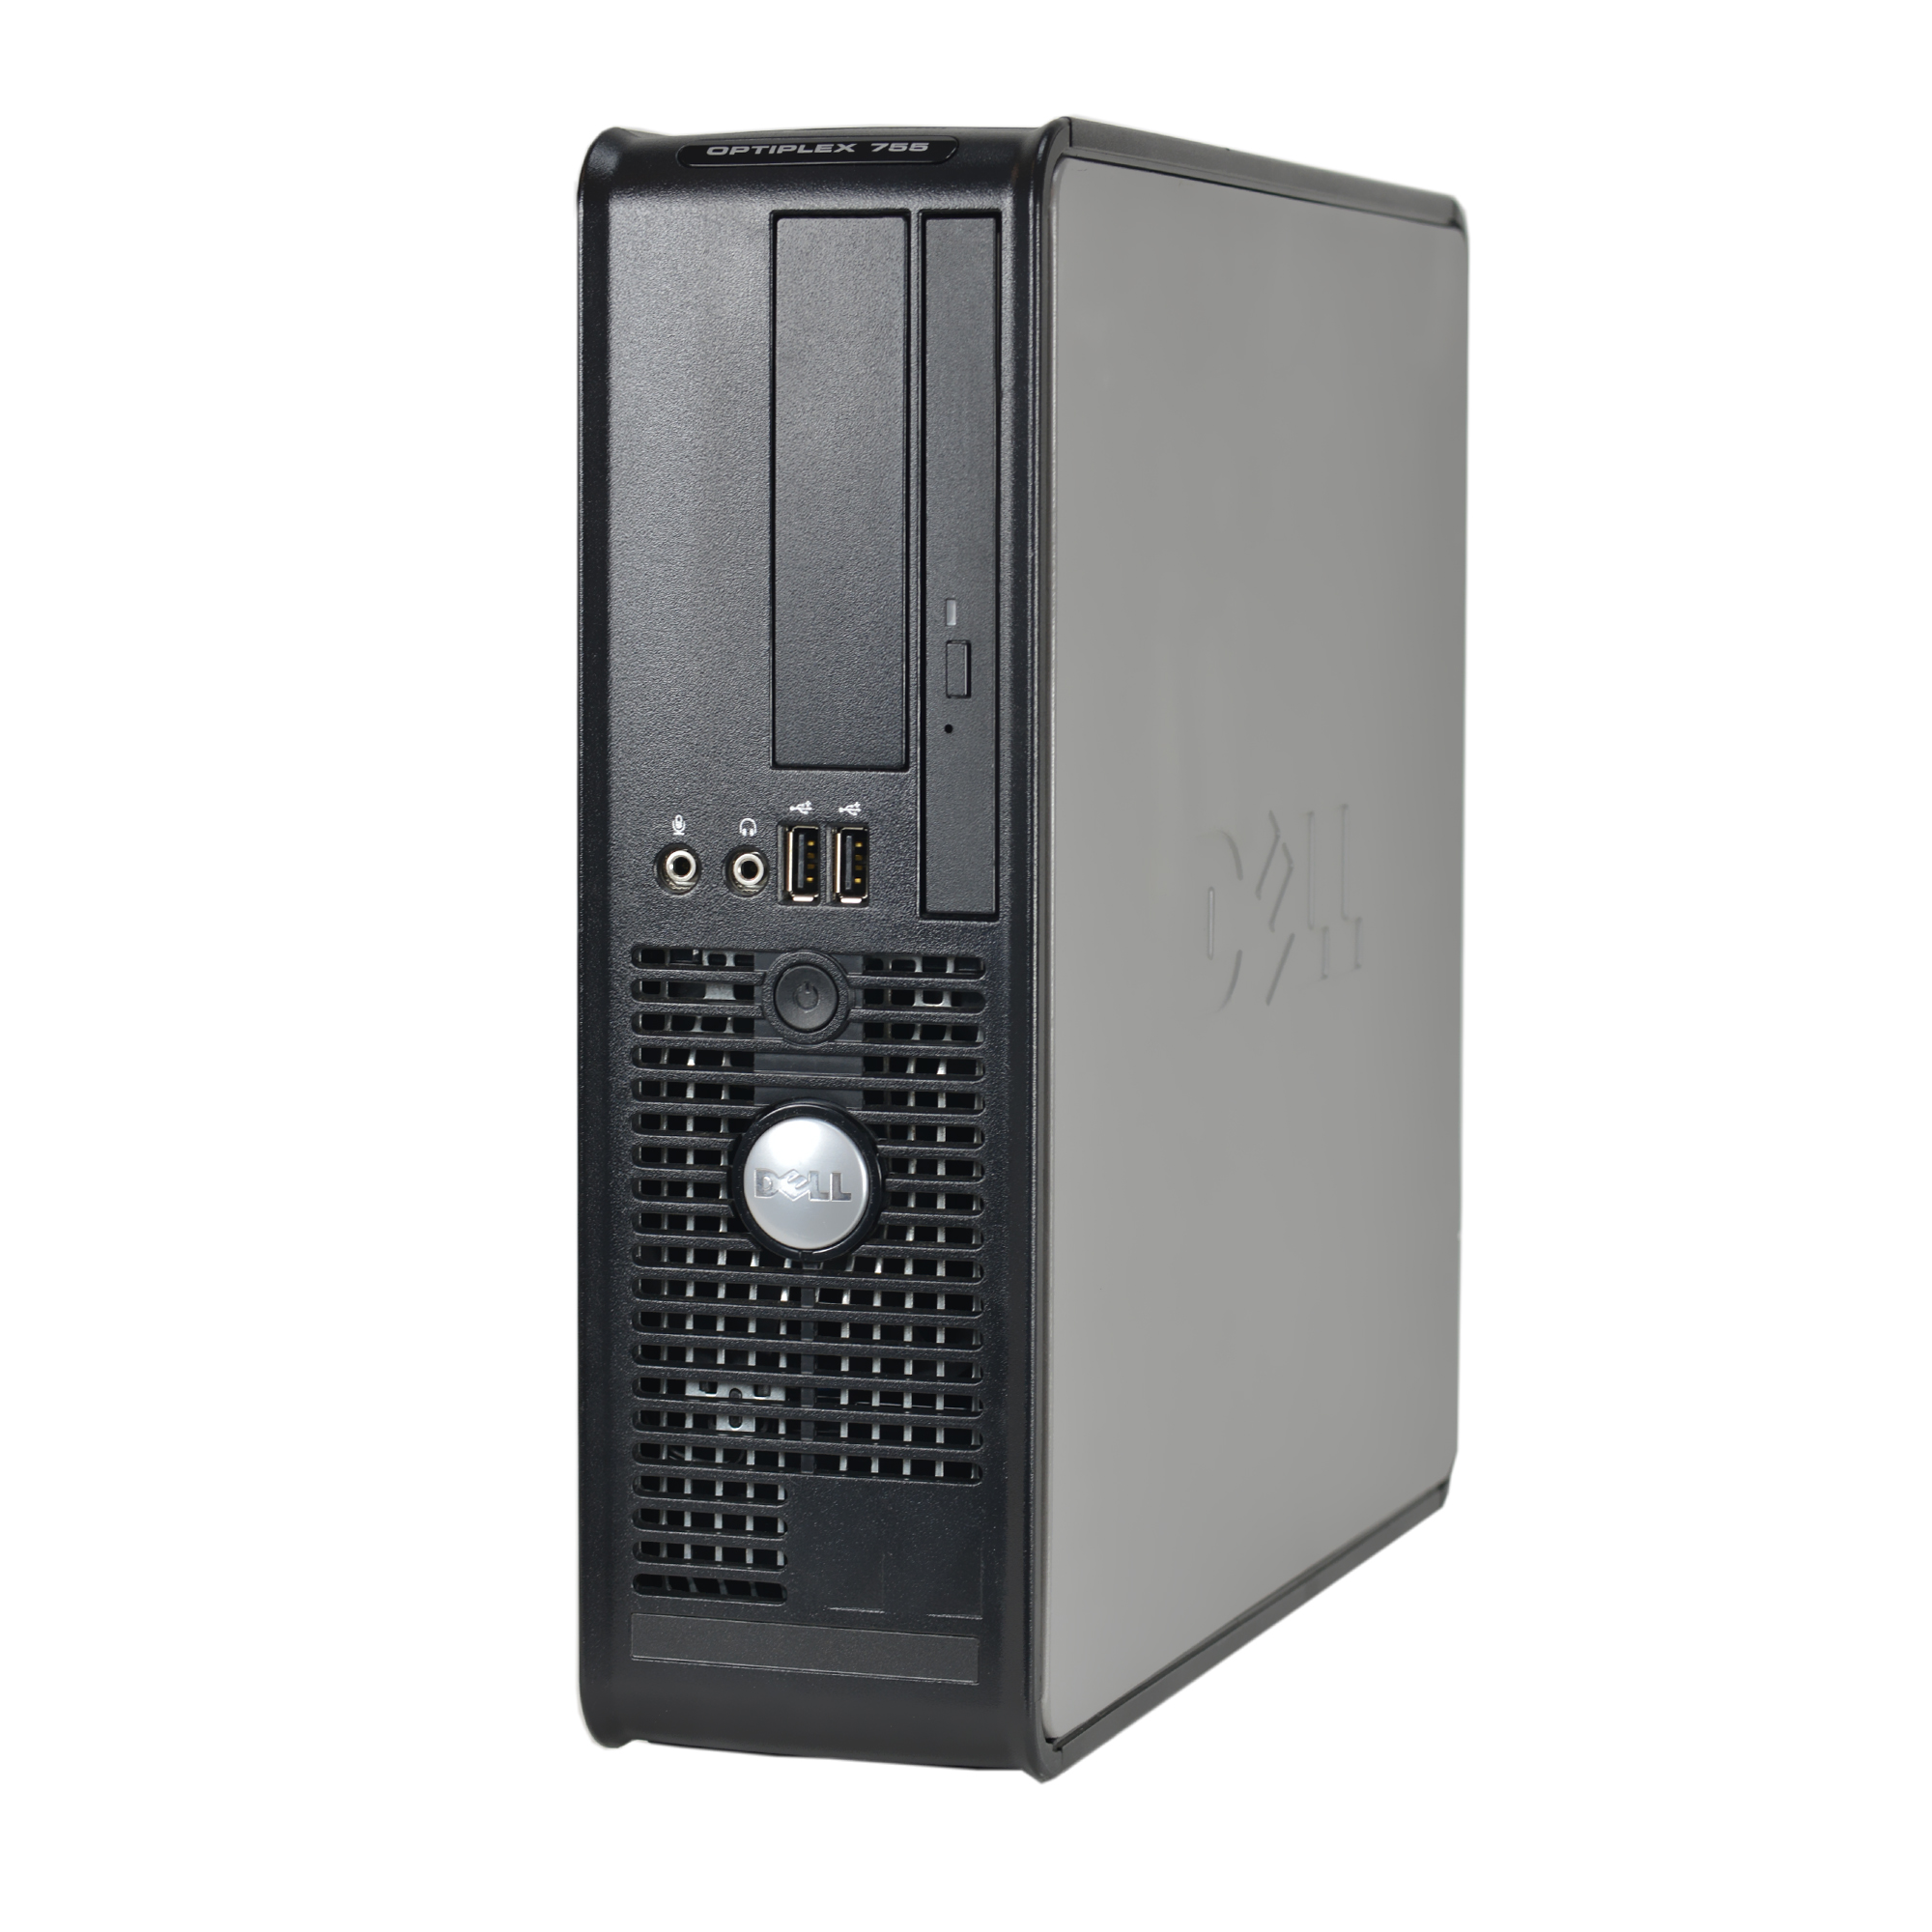 Restored Dell 755 Small Form Factor Desktop PC with Intel Core 2 Duo Processor, 2GB Memory, 320GB Hard Drive and Windows 10 Pro (Monitor Not Included) (Refurbished) - image 1 of 3